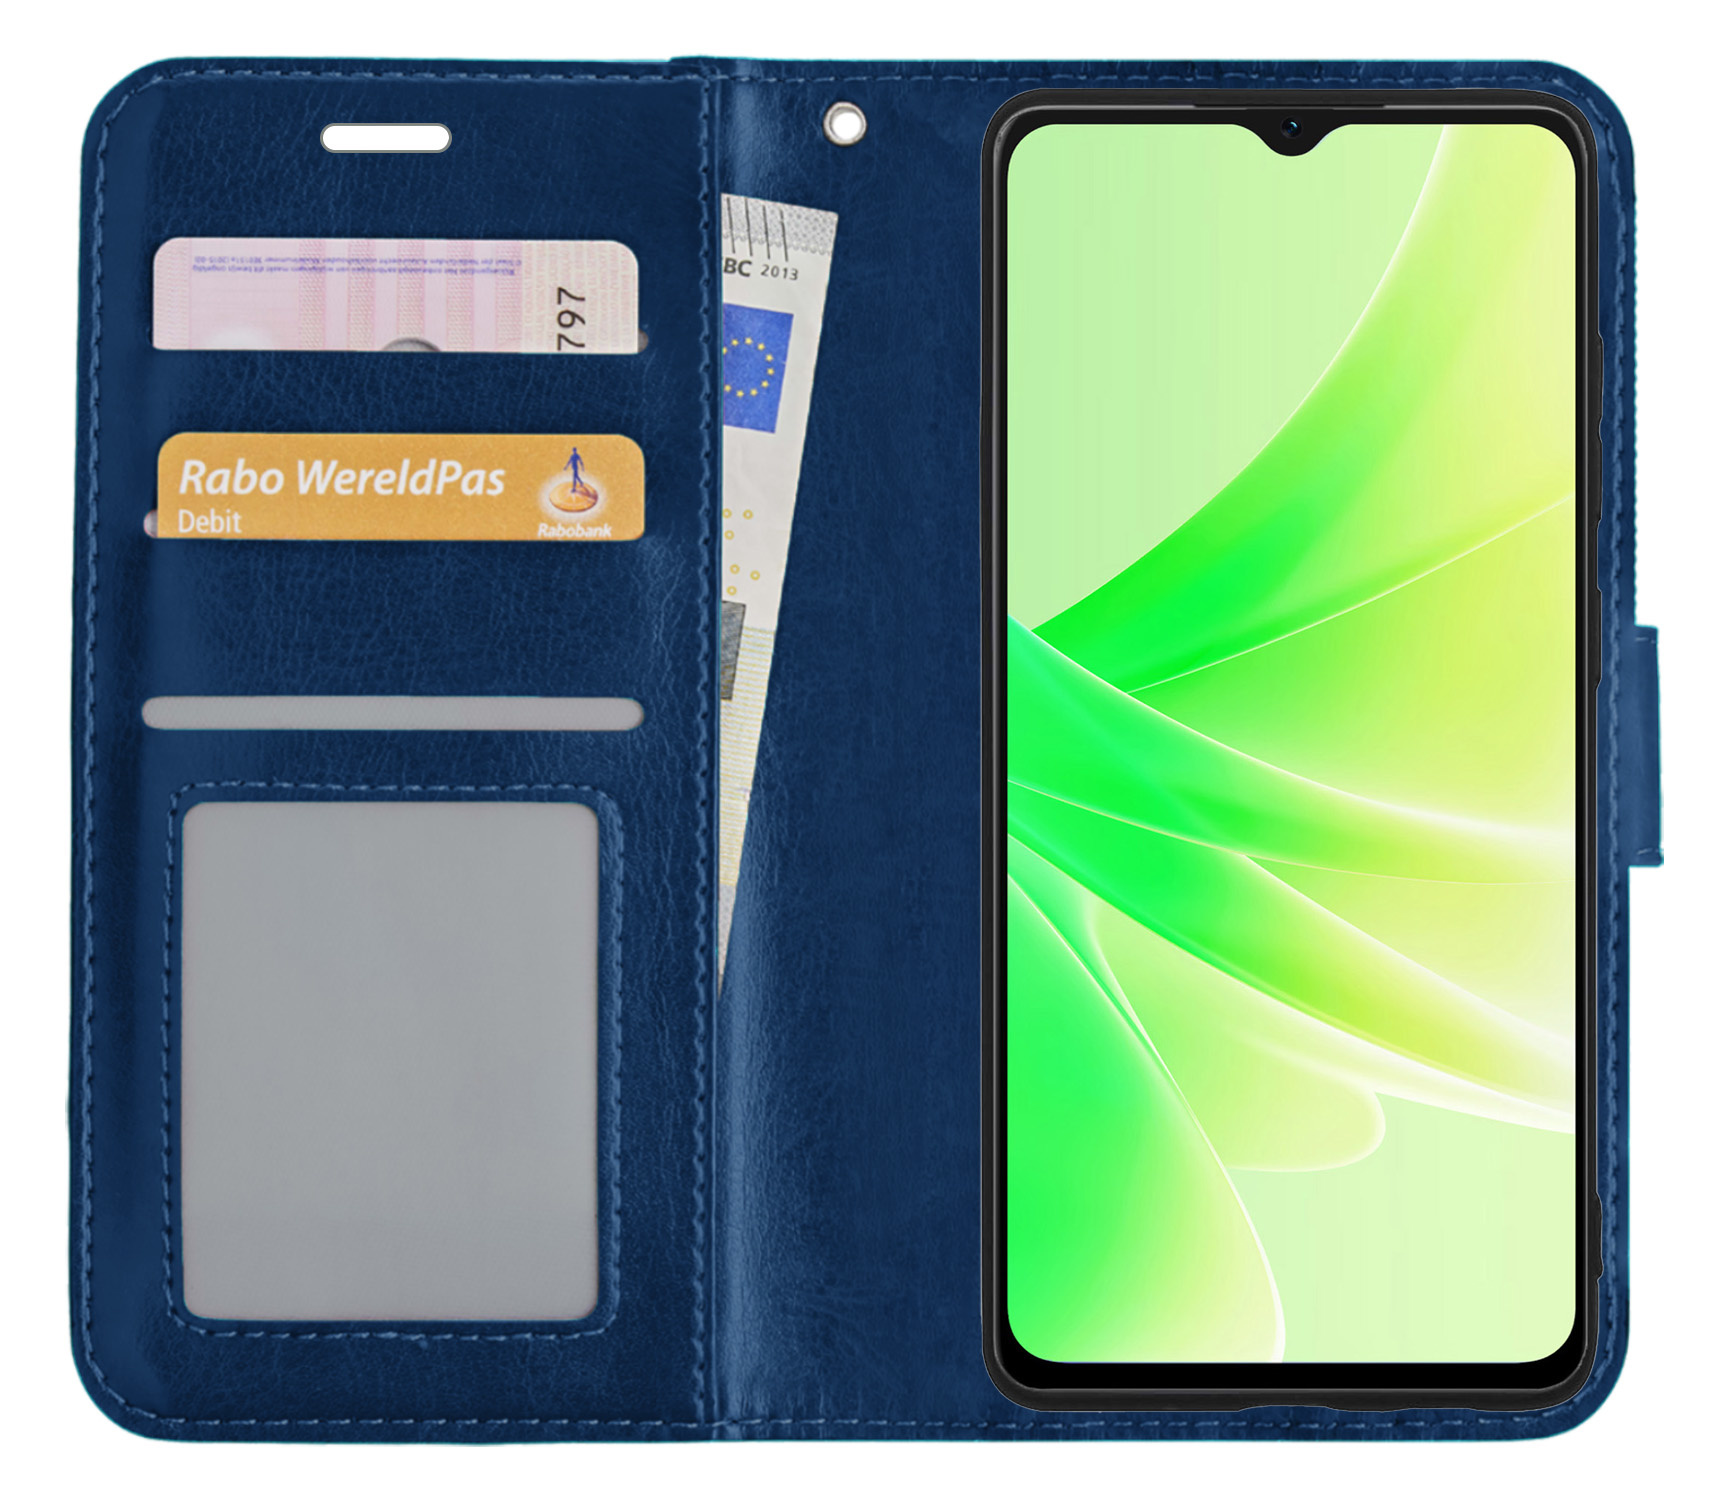 Nomfy OPPO A57s Hoes Bookcase Flipcase Book Cover Met 2x Screenprotector - OPPO A57s Hoesje Book Case - Donker Blauw